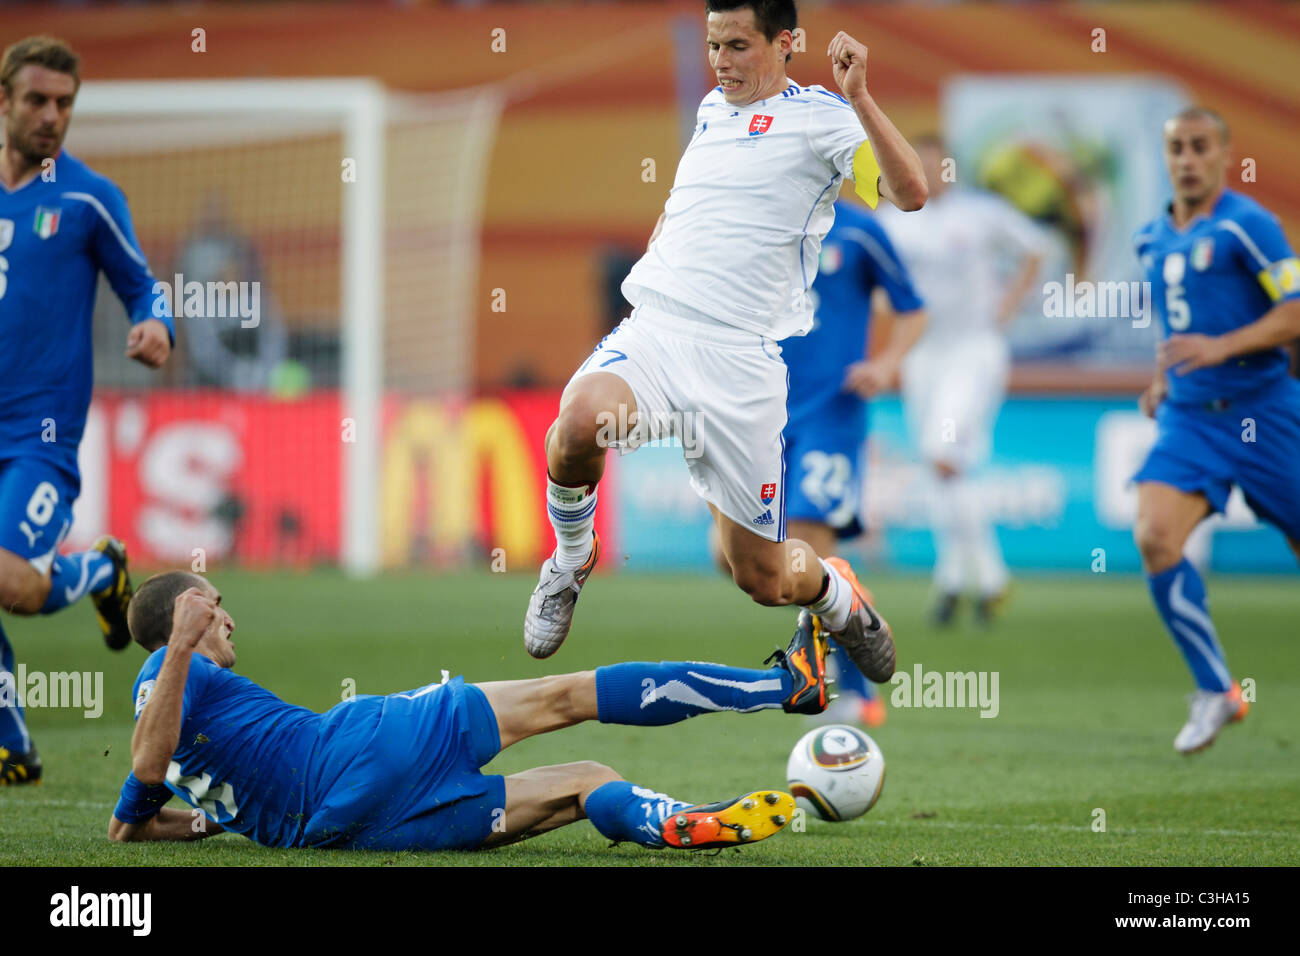 Giorgio Chiellini of Italy (l) tackles the ball from Marek Hamsik of Slovakia (r) during a 2010 FIFA World Cup soccer match. Stock Photo